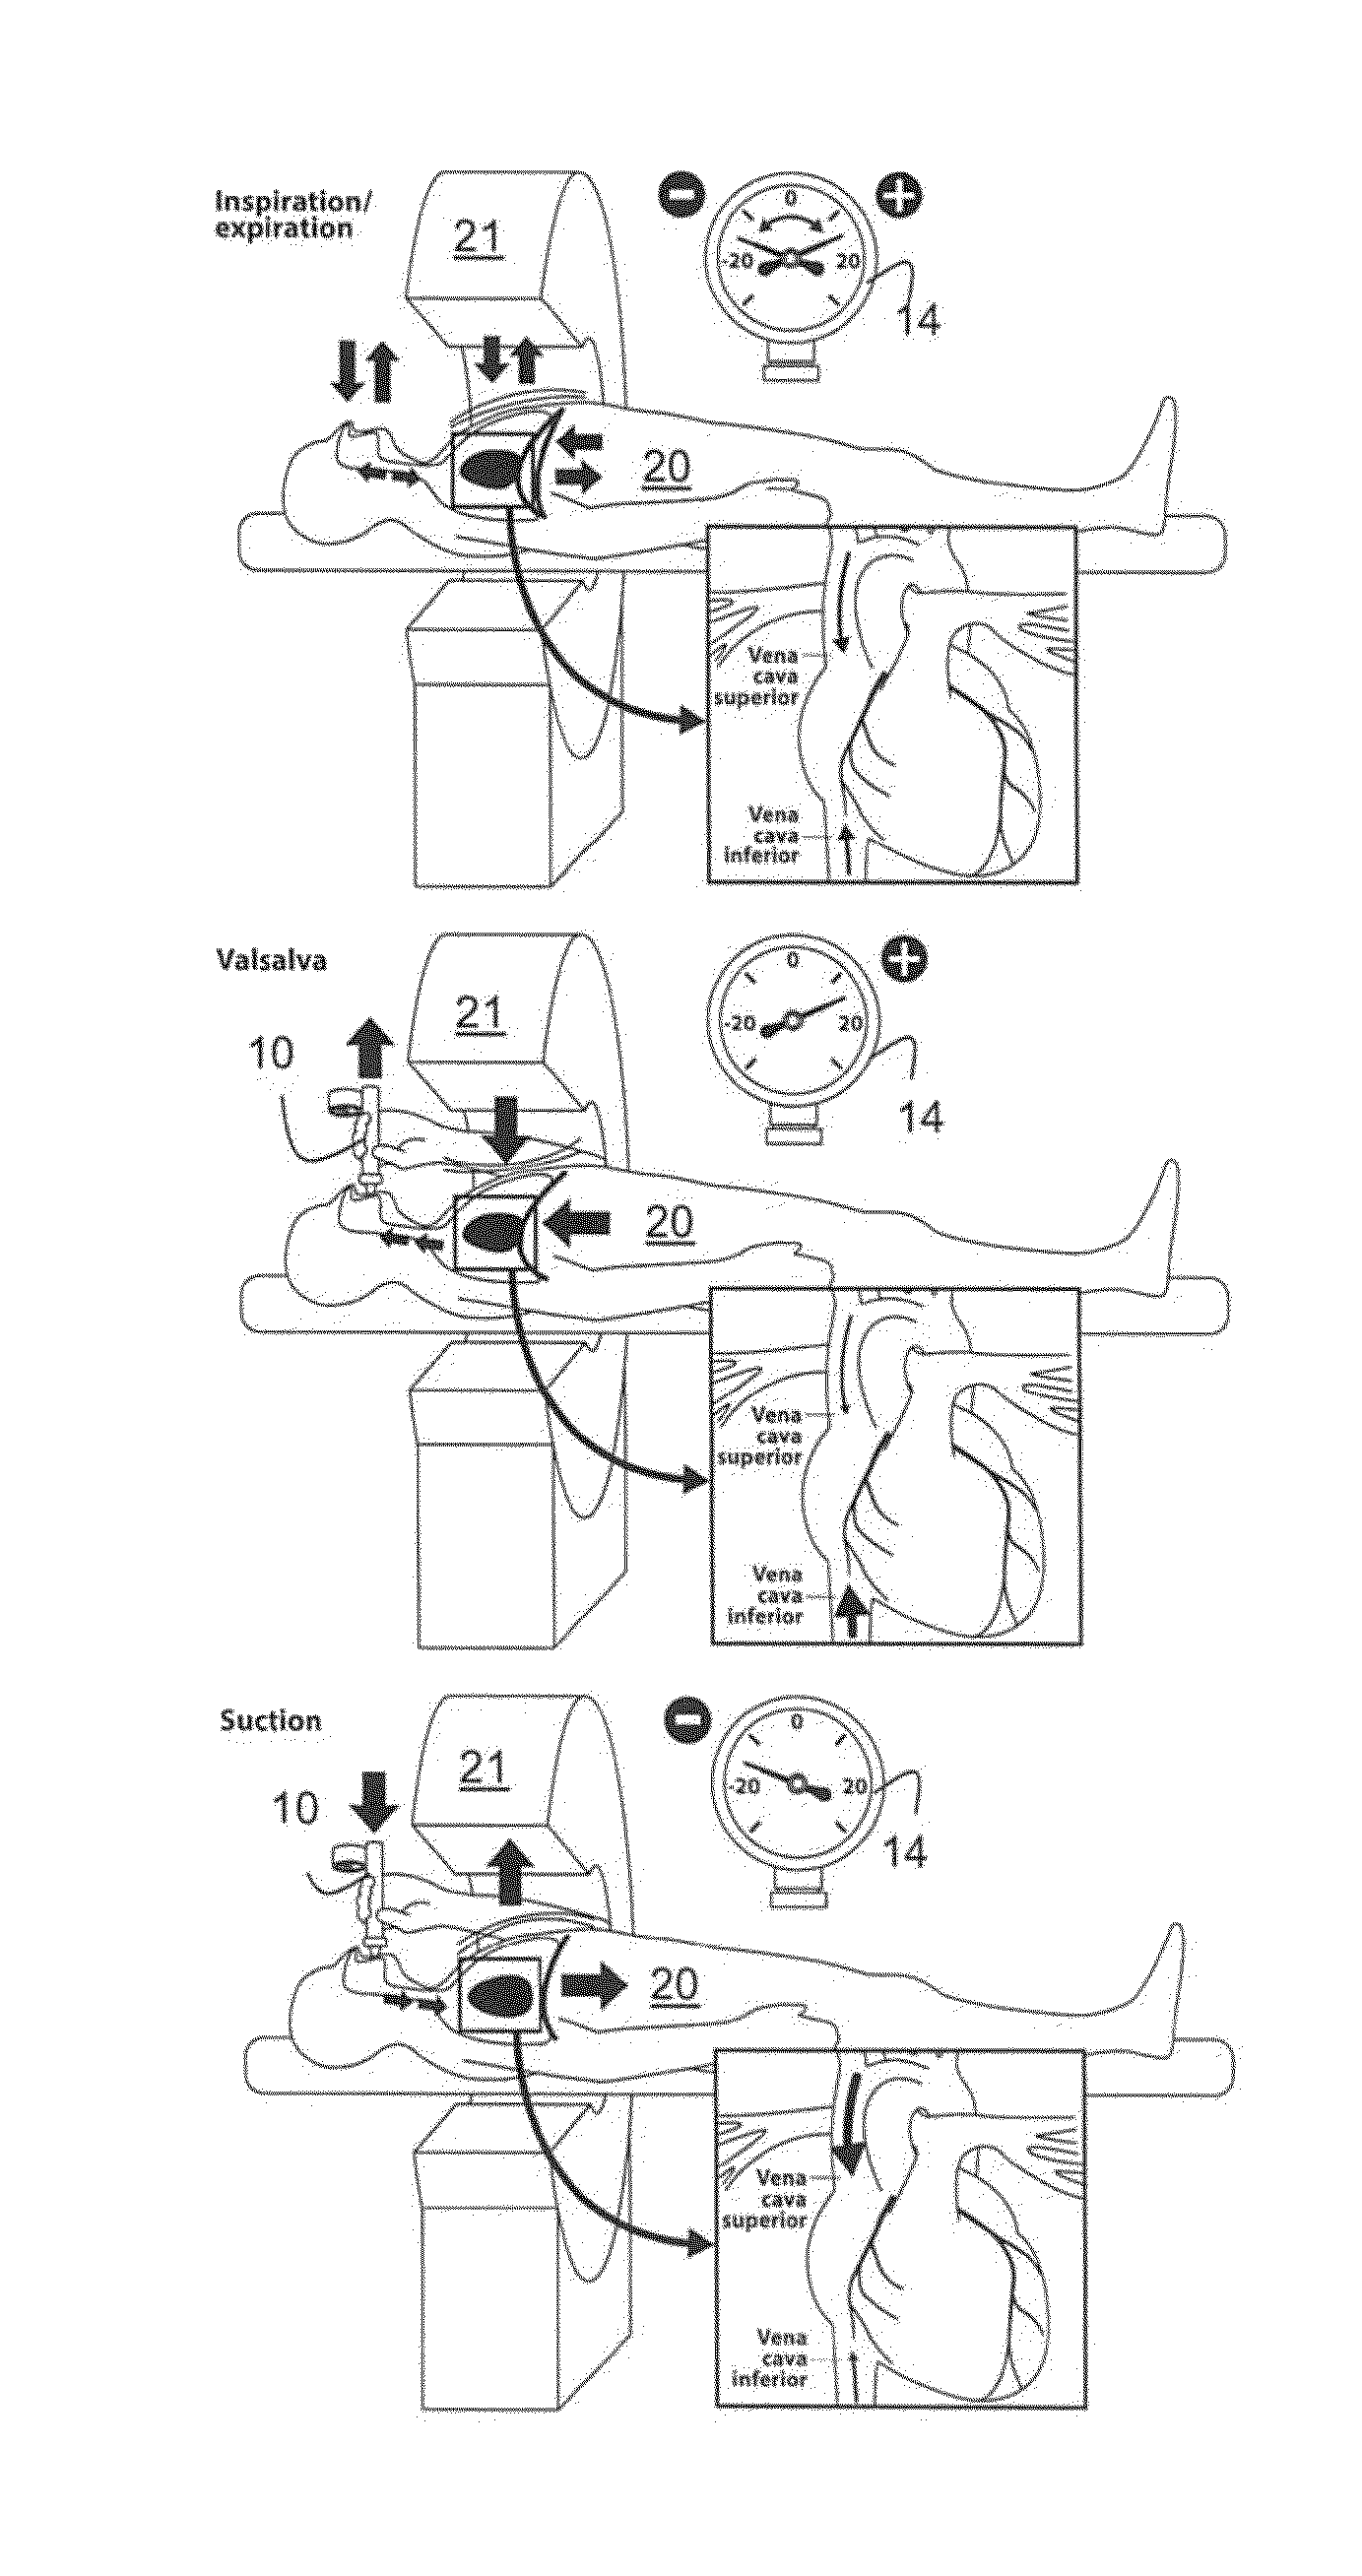 Blood flow control system and methods for in-vivo imaging and other applications